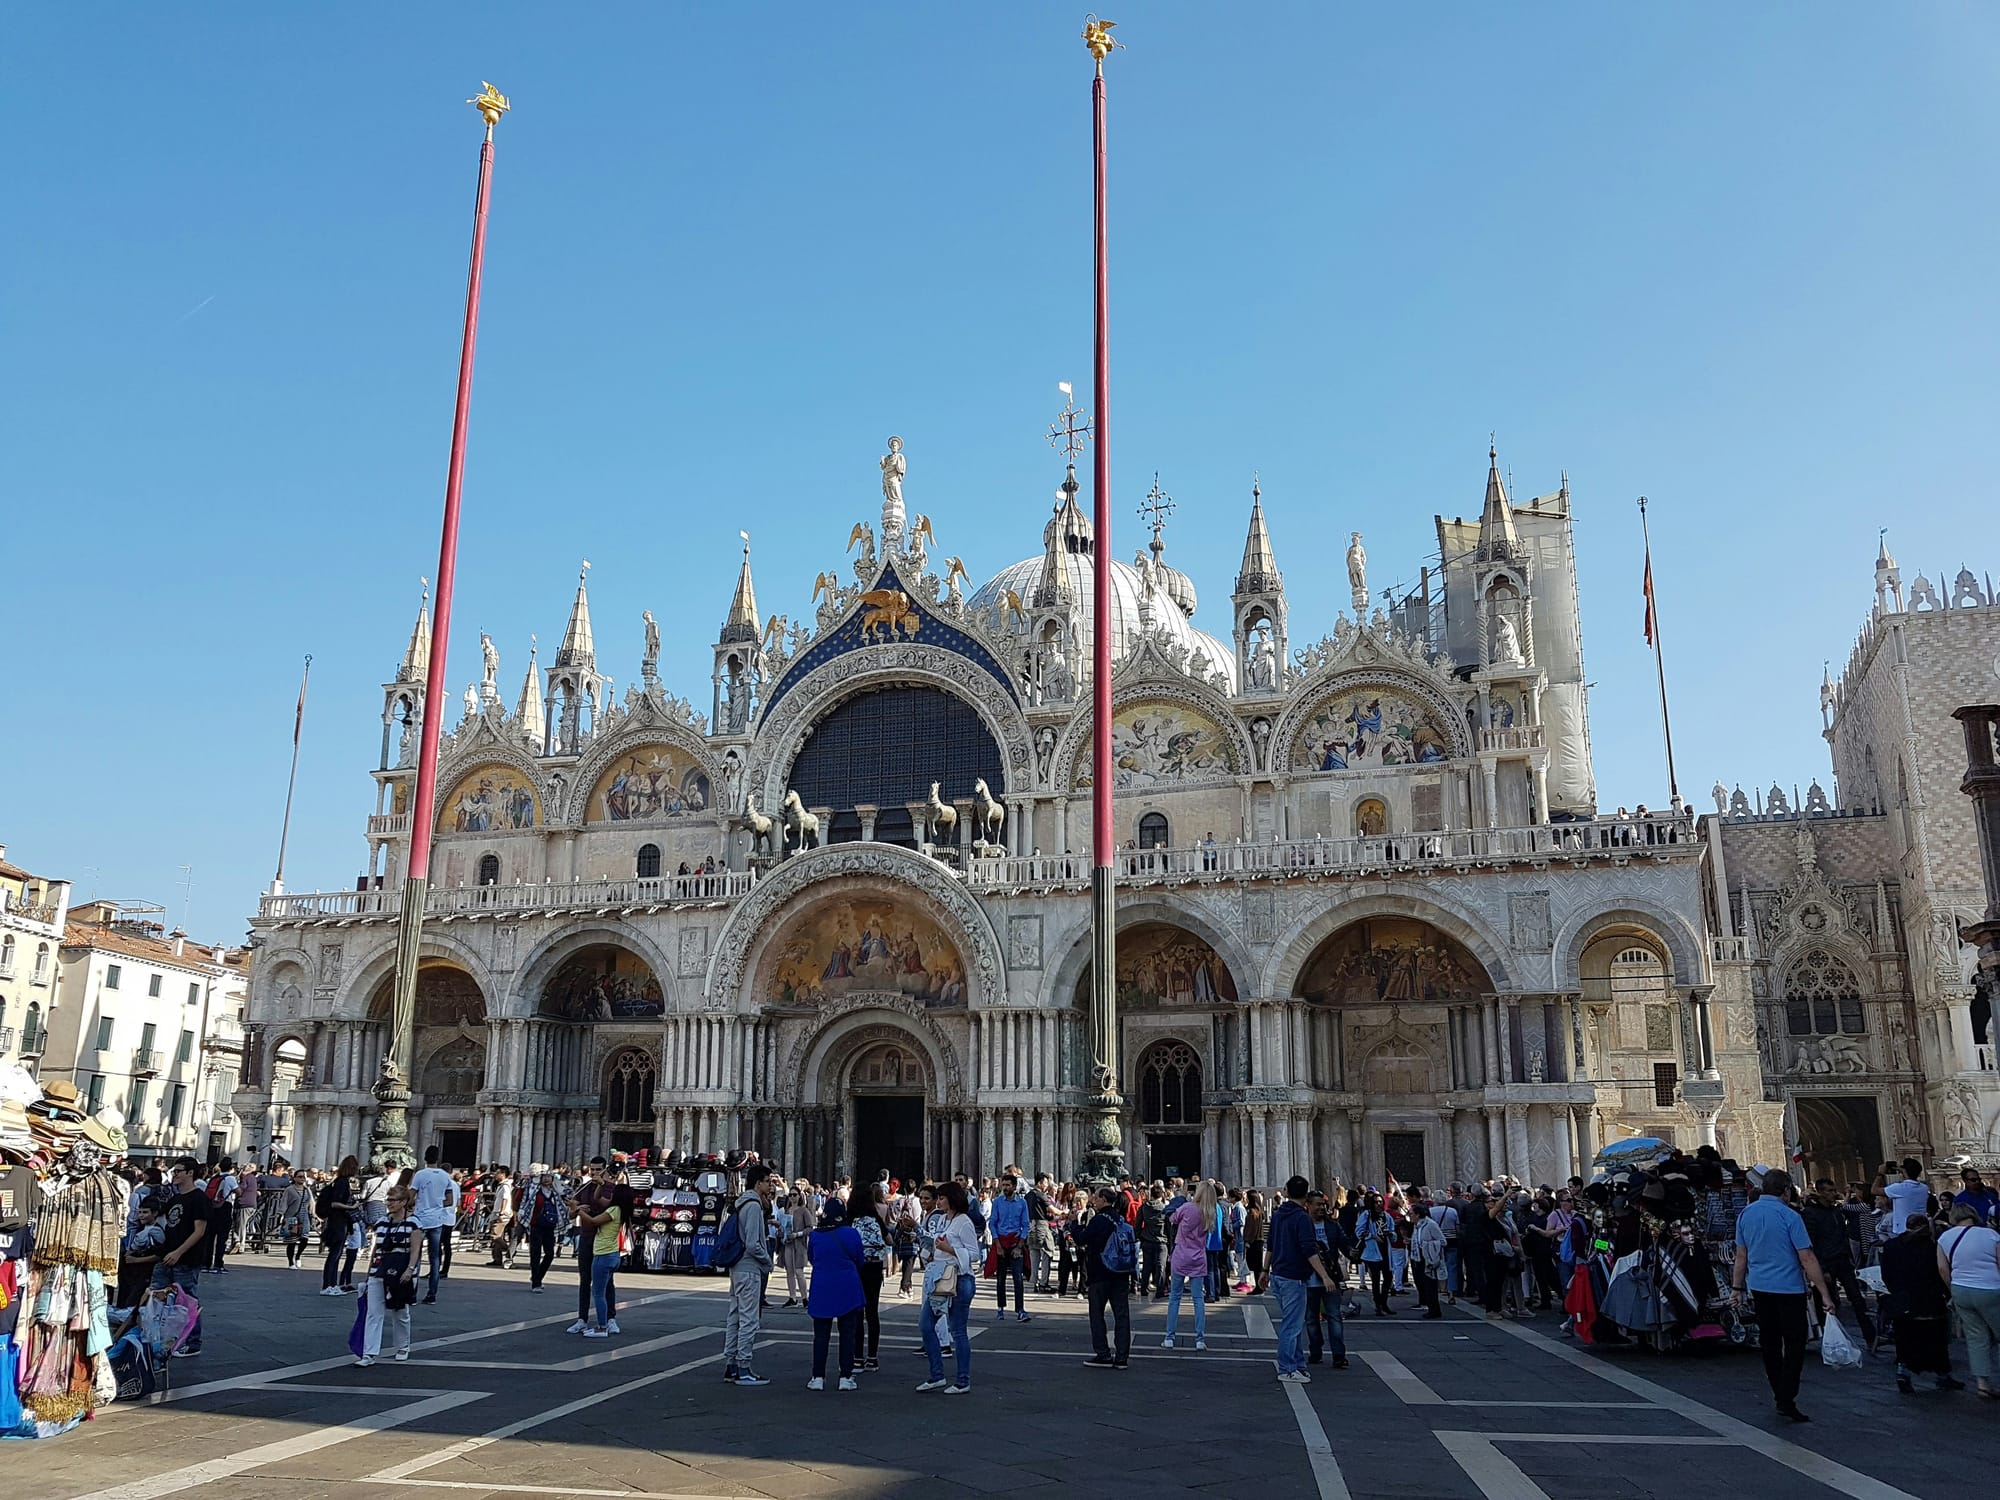 Basilica of San Marco is an accessible attraction in Venice